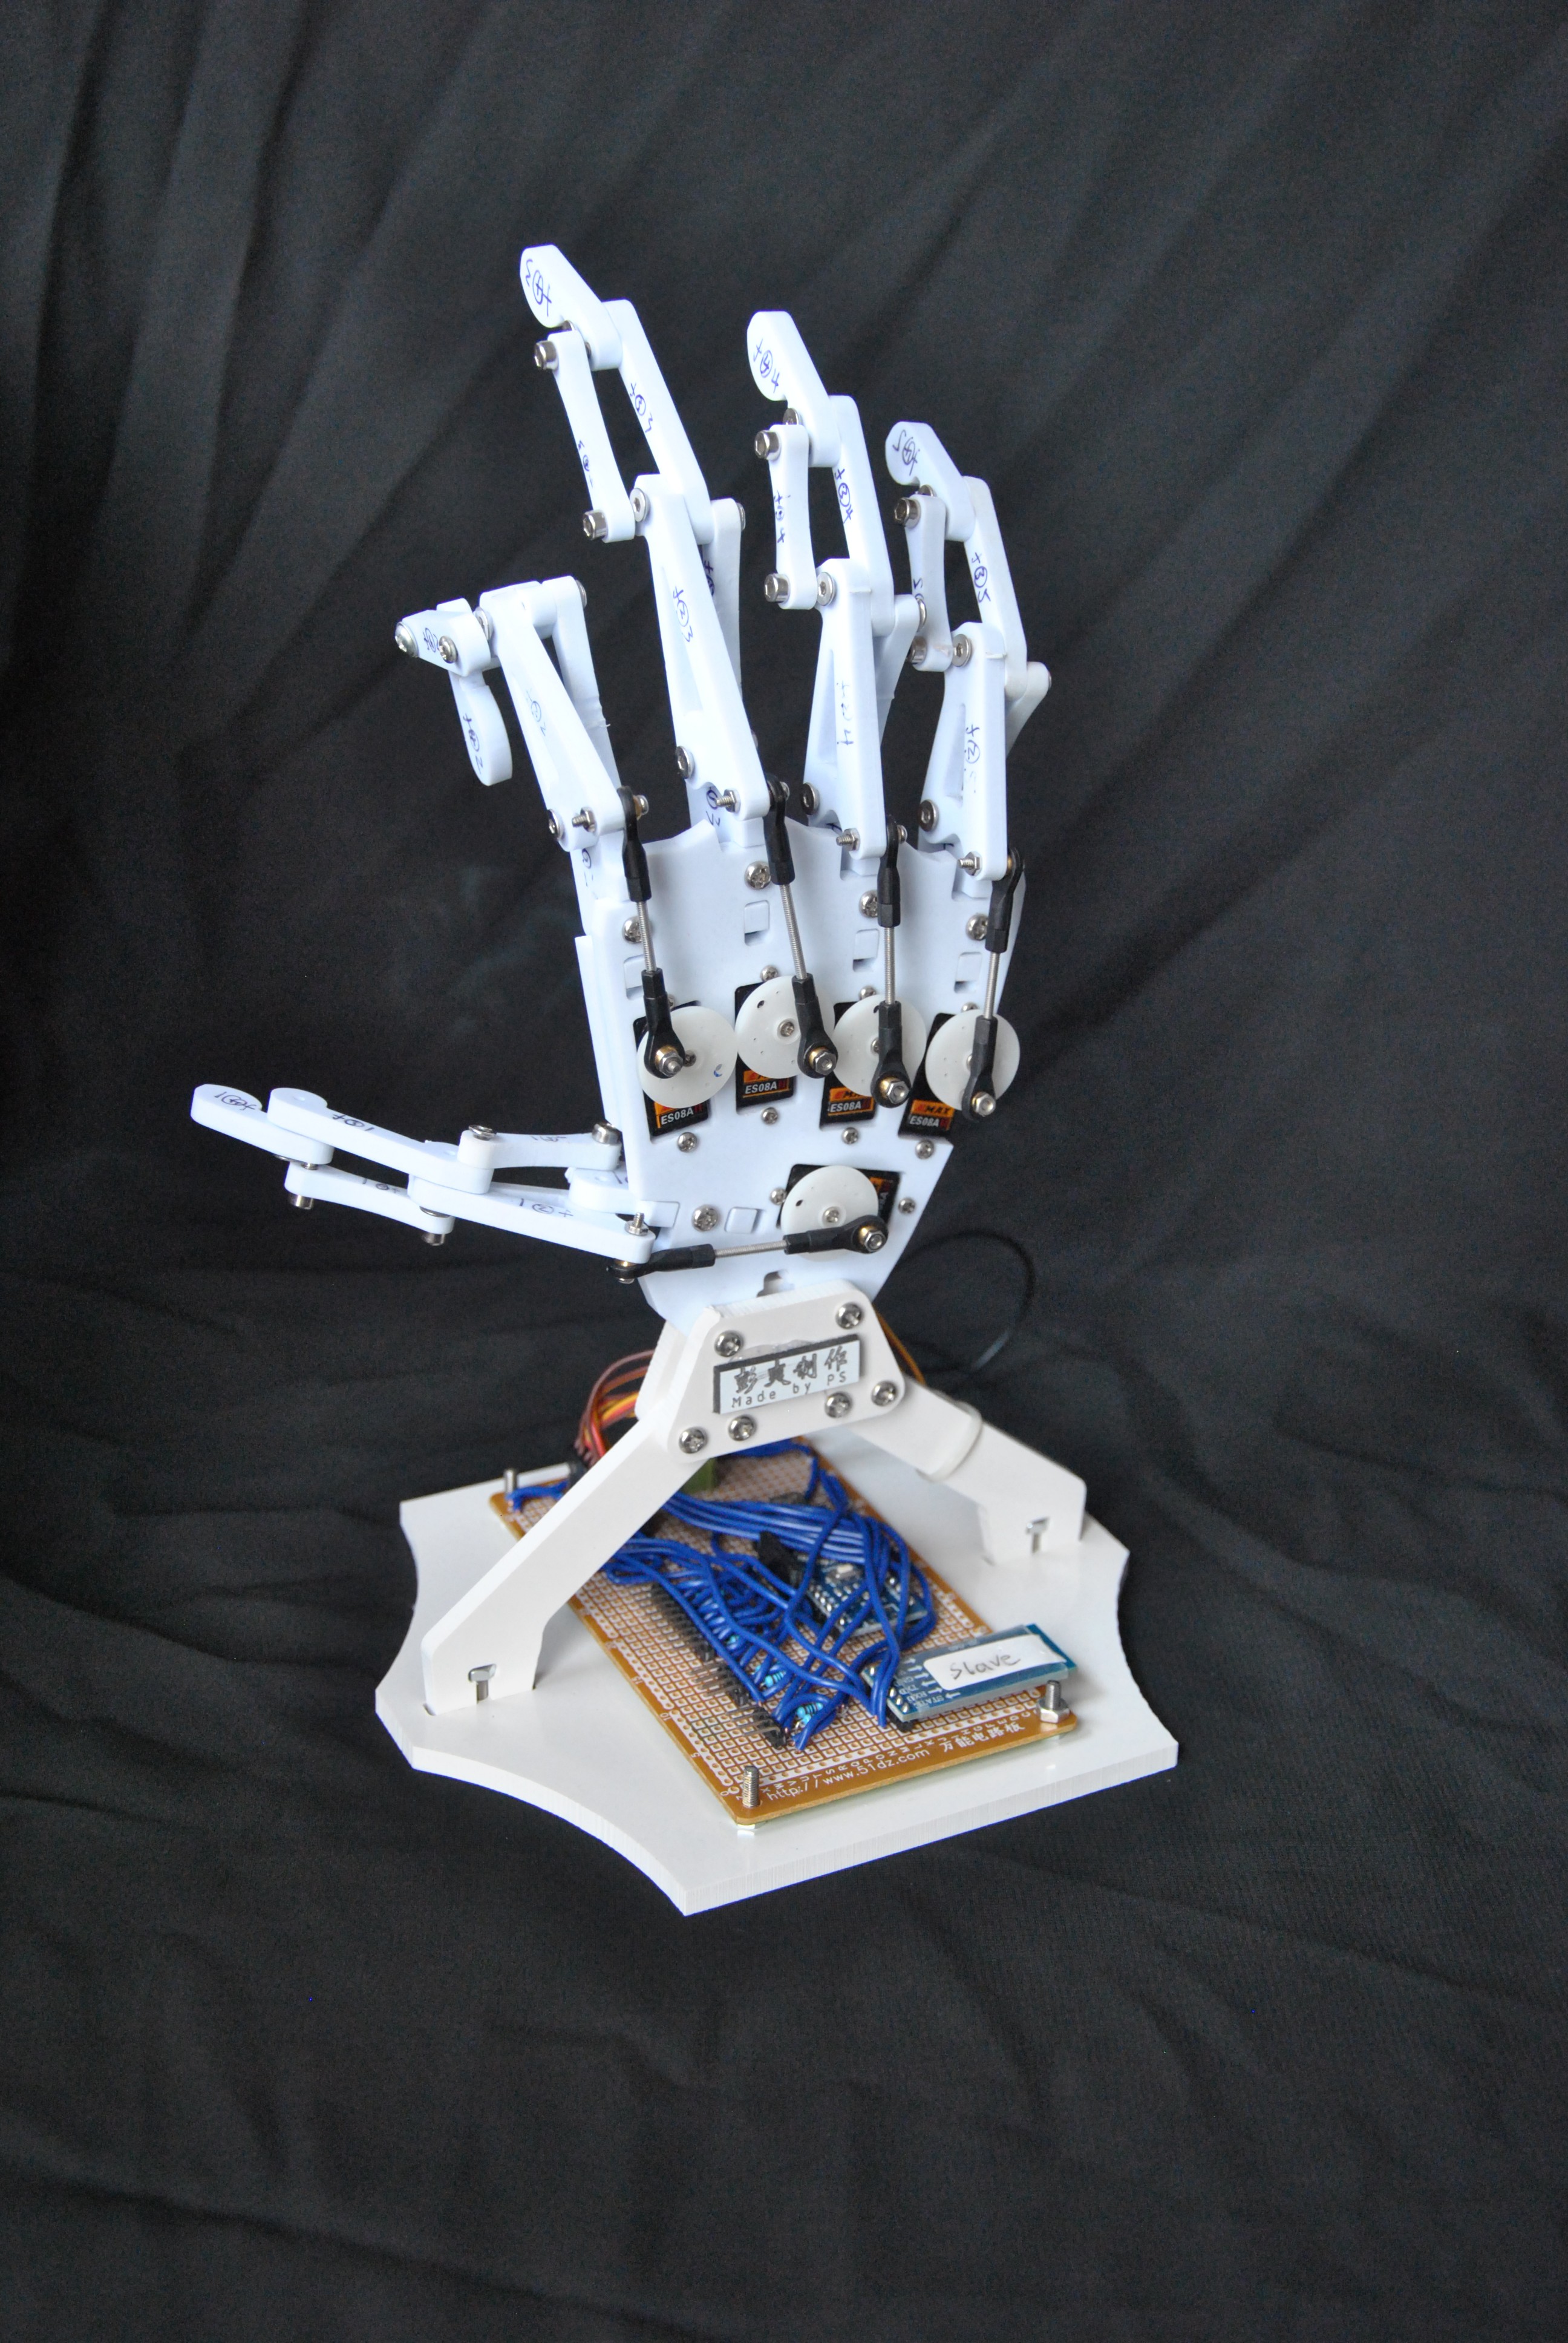 A Closer Look at the Fully Animatronic Version of the Hand From